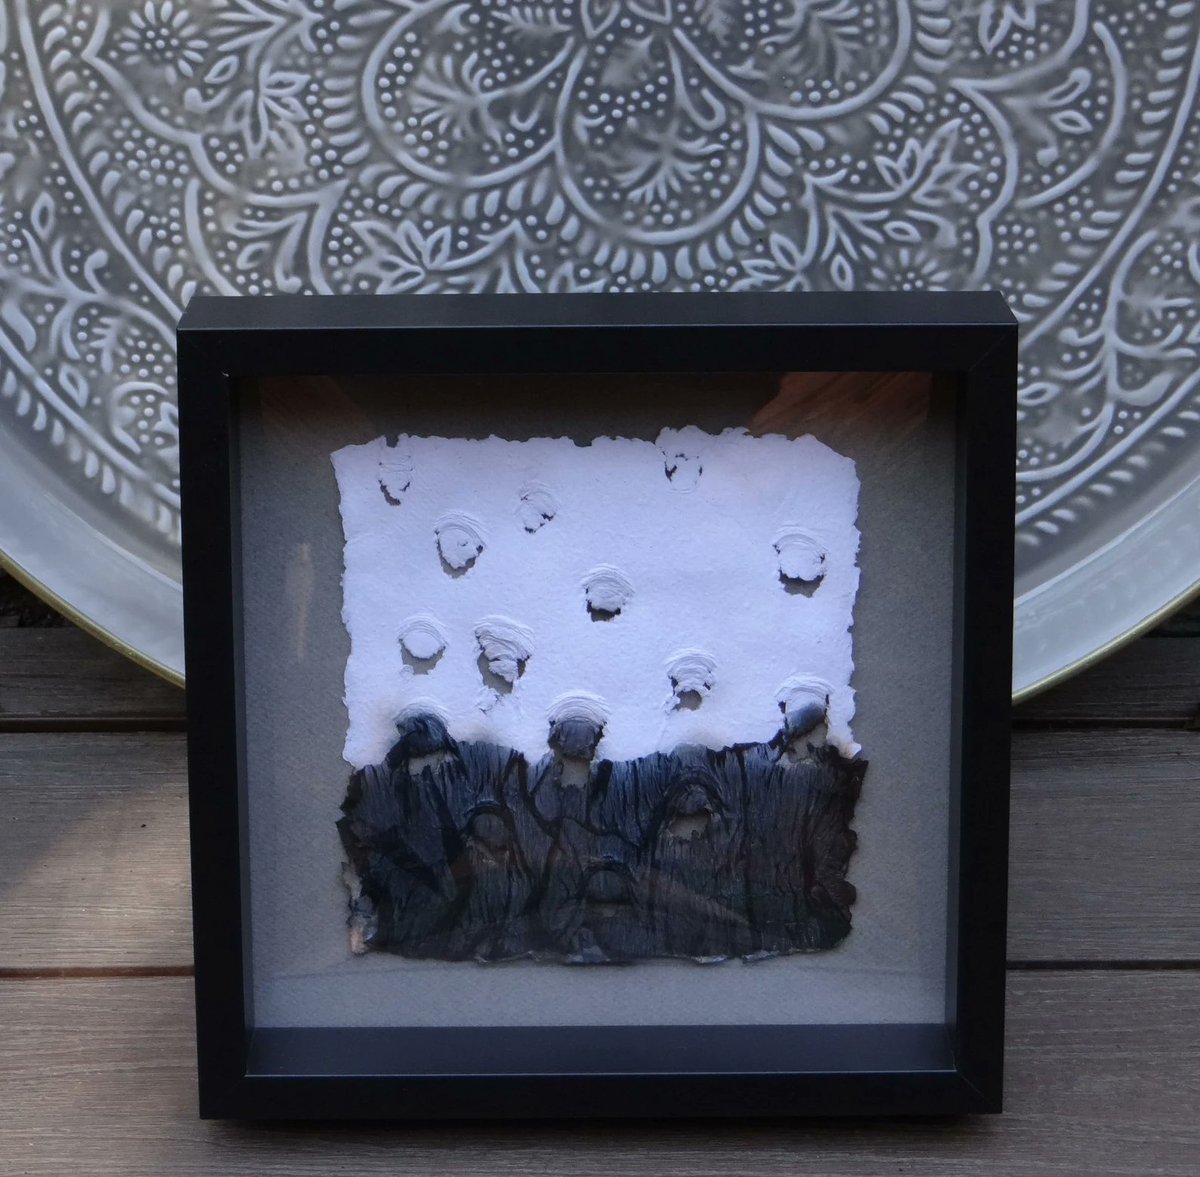 Gemma Piera, abstract creation, paper mache and crepe paper, textures and reliefs, framed artwork #homedecor #etsyfinds #paperMache #decor #onlineshopping #HomeStyle #DecorateWithArt  #elevateYourDecor #MothersDay #wiseshopper 
Available here
 elementsdeco.etsy.com/listing/130469…